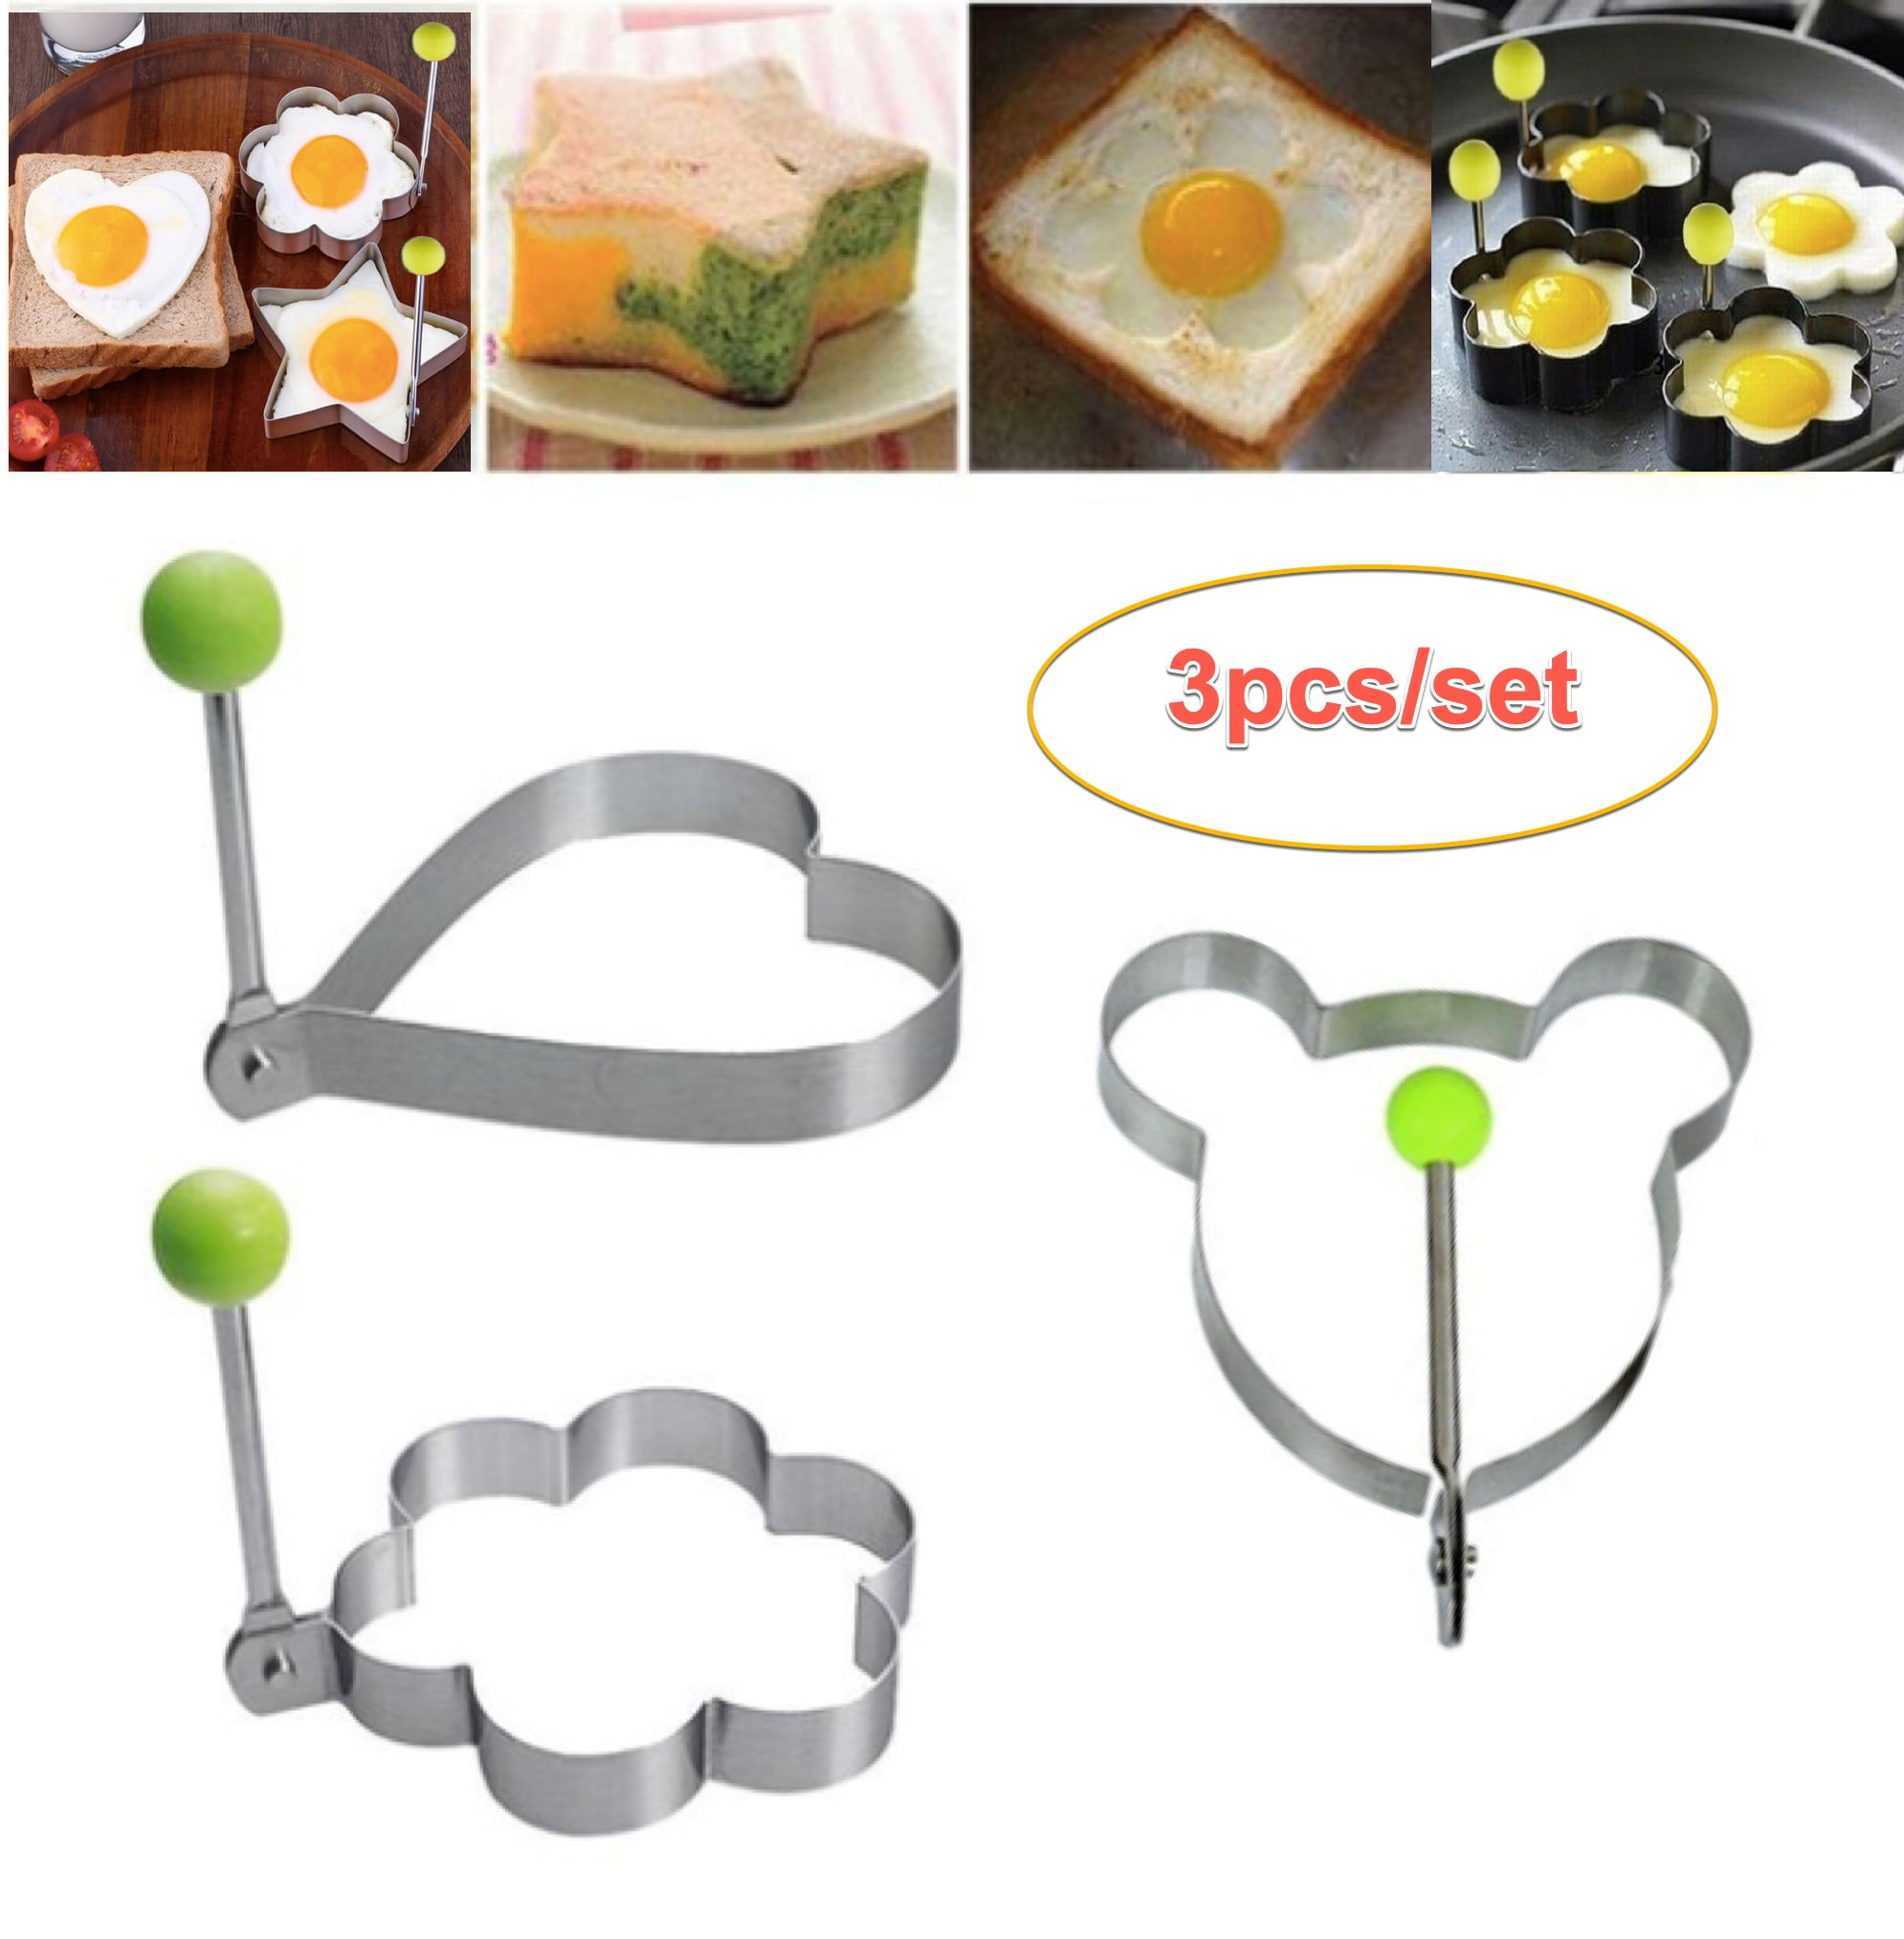 Unique Fried Egg Shaper, Omelette, Pancake, Scrambled Eggs DIY Mold Rings,  Specialty Cooking Tool with Handle, Mold Non Stick Stainless Steel for  Griddle Pan, Heart, Flower Shape Mickey-like 3Pcs/set 